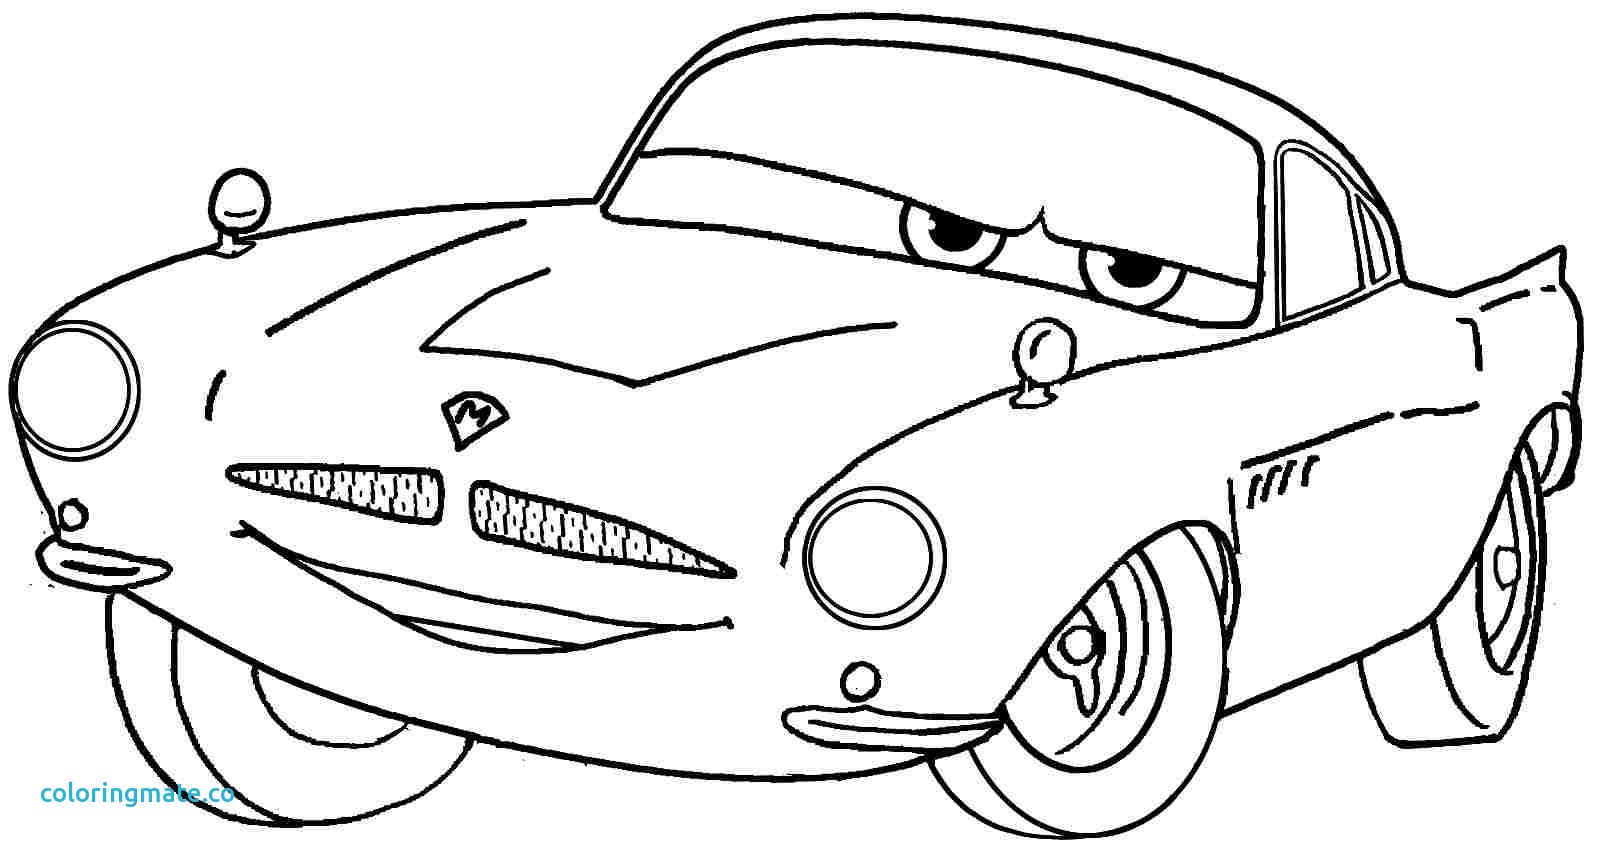 Cars Coloring Pages Pdf at Free